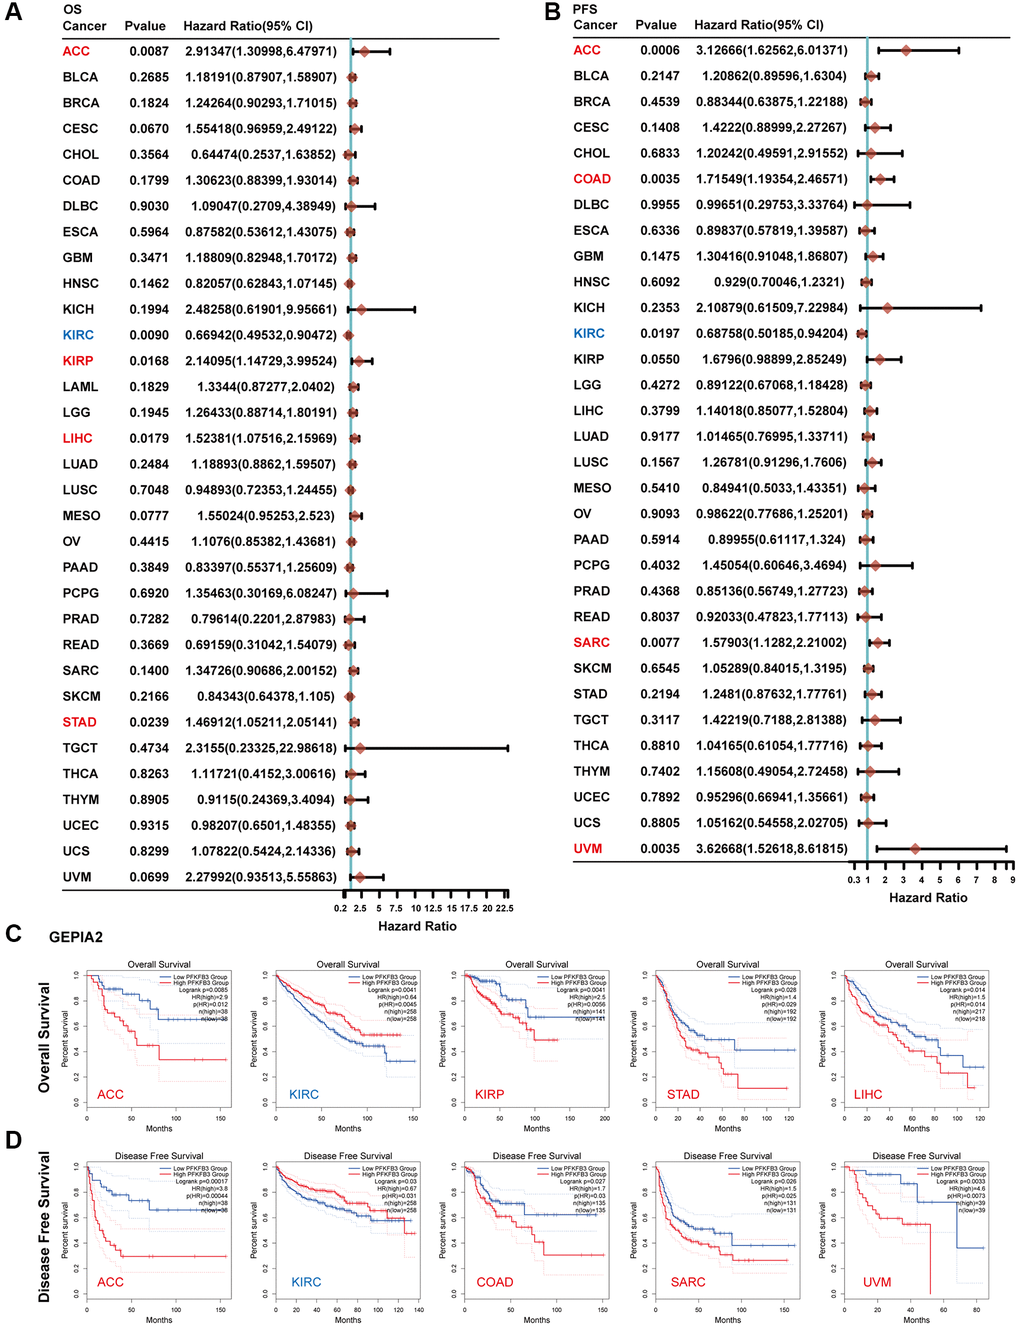 The correlation between PFKFB3 gene expression and survival prognosis in pan-cancer. (A) Analyzing overall survival (OS) of various tumors in TCGA according to PFKFB3 gene expression. (B) Analyzing Progression-free survival (PFS) of various tumors in TCGA according to PFKFB3 gene expression. (C) We utilized the GEPIA2 to analyze OS of various tumors in TCGA according to PFKFB3 gene expression. (D) We utilized the GEPIA2 to analyze disease-free survival (DFS) of various tumors in TCGA according to PFKFB3 gene expression.